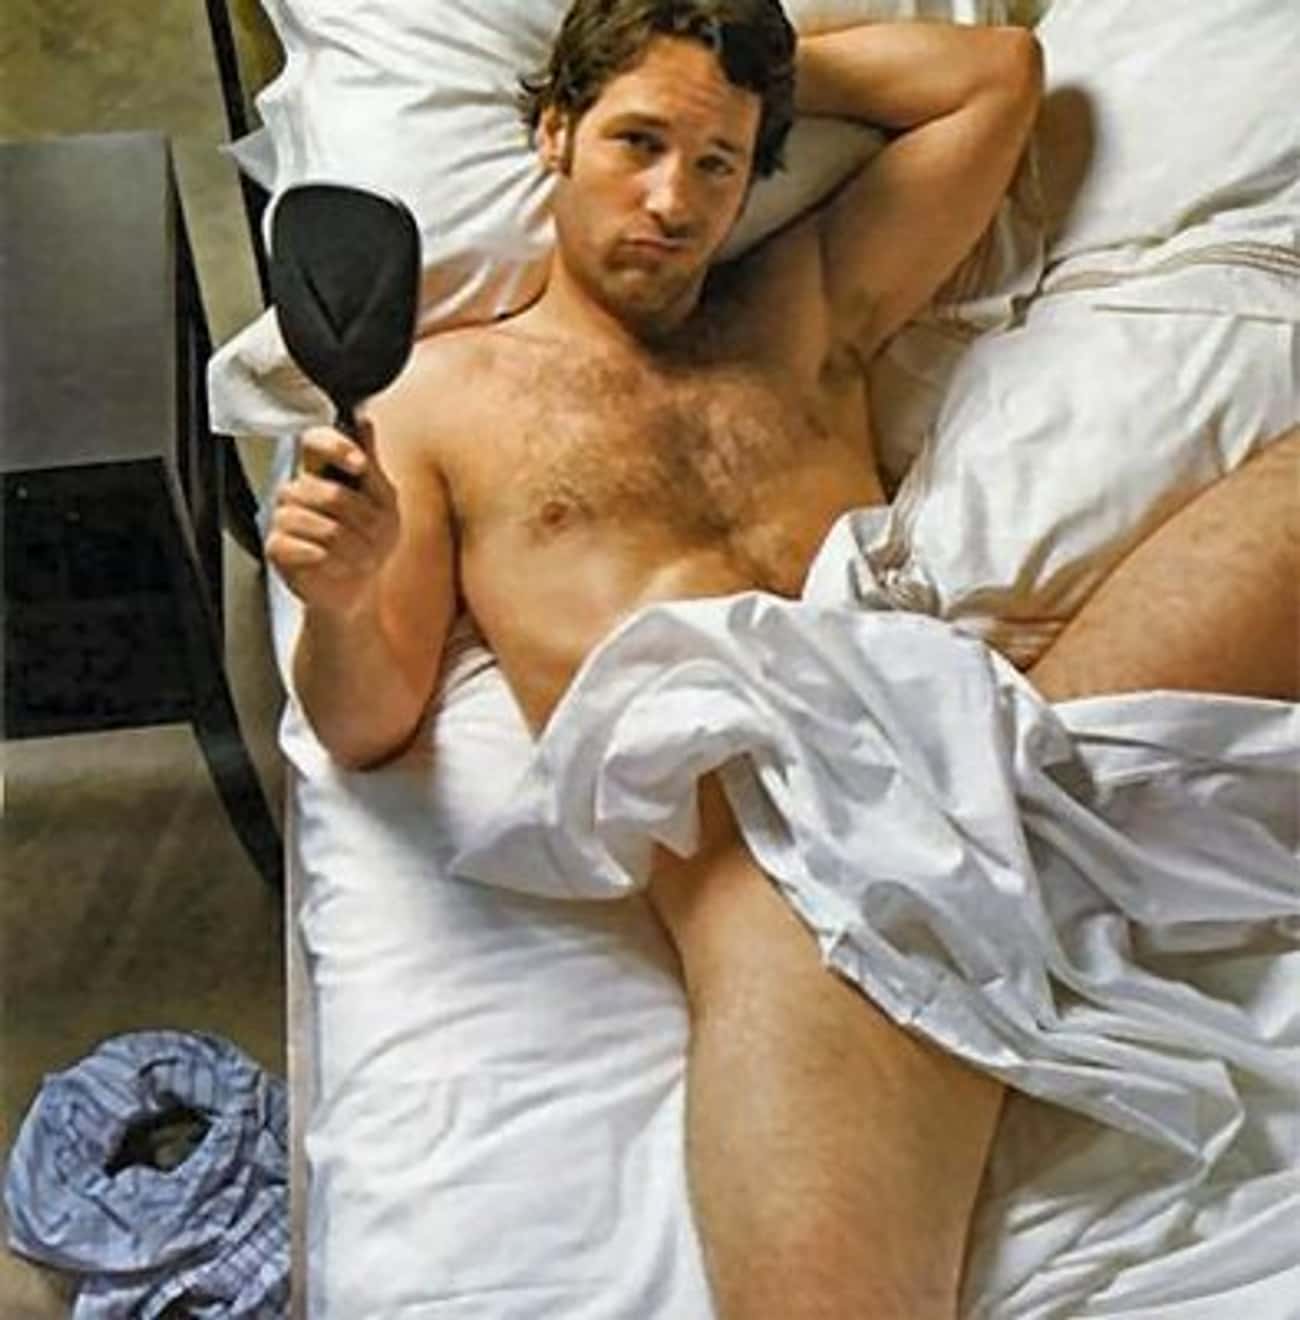 Paul Rudd in White Cloth Covered